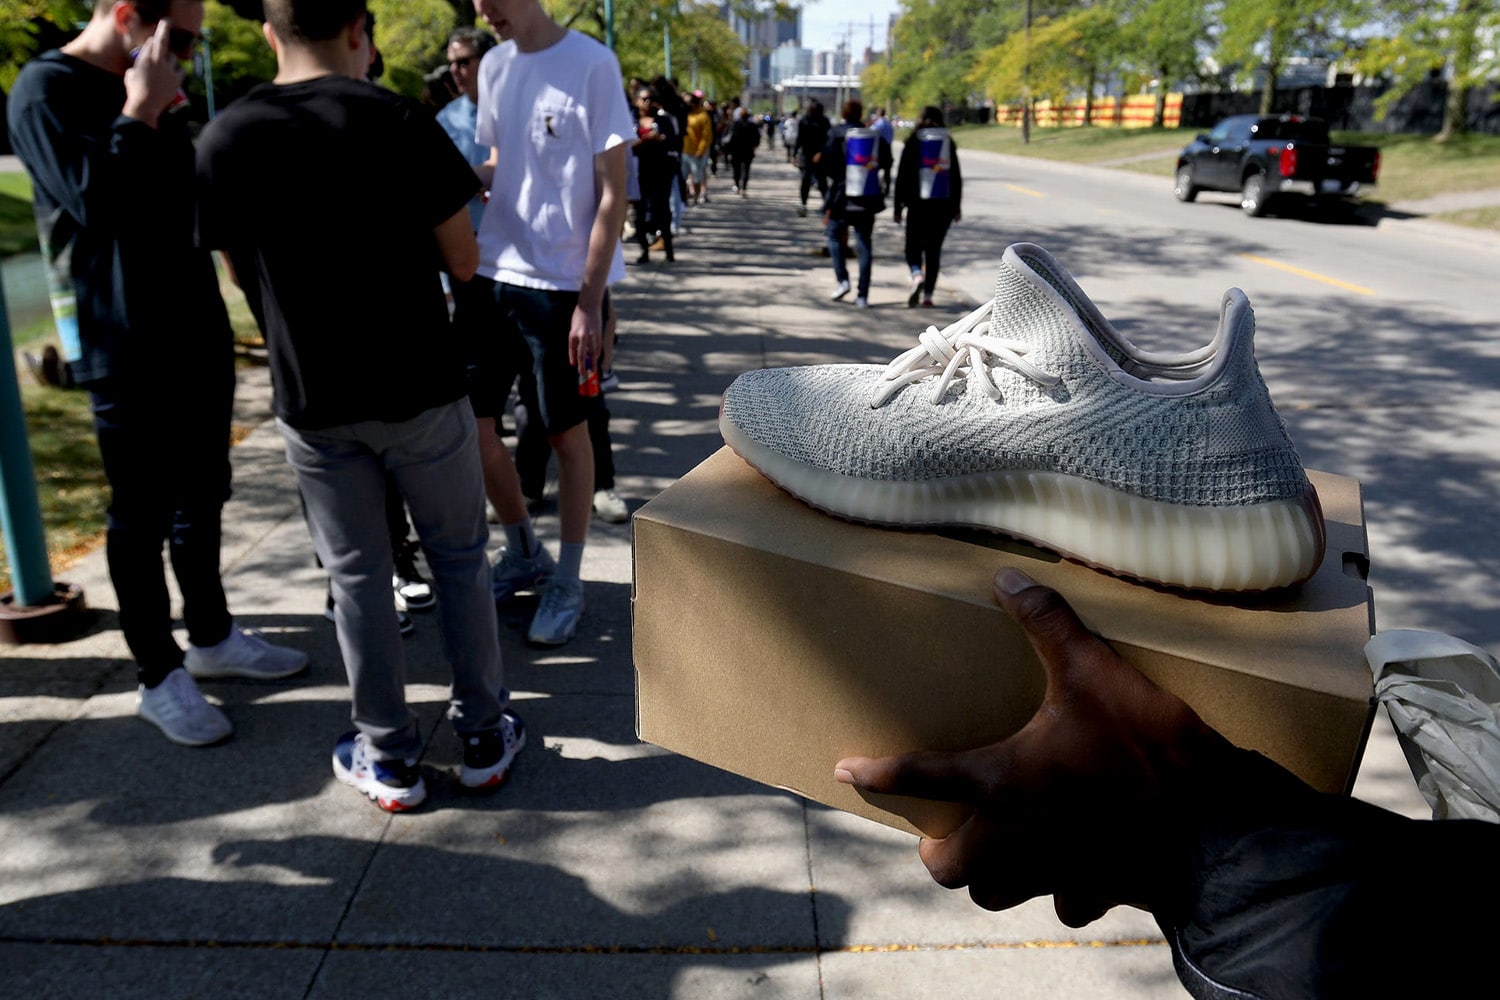 A Yeezy-branded Adidas sneaker for sale.